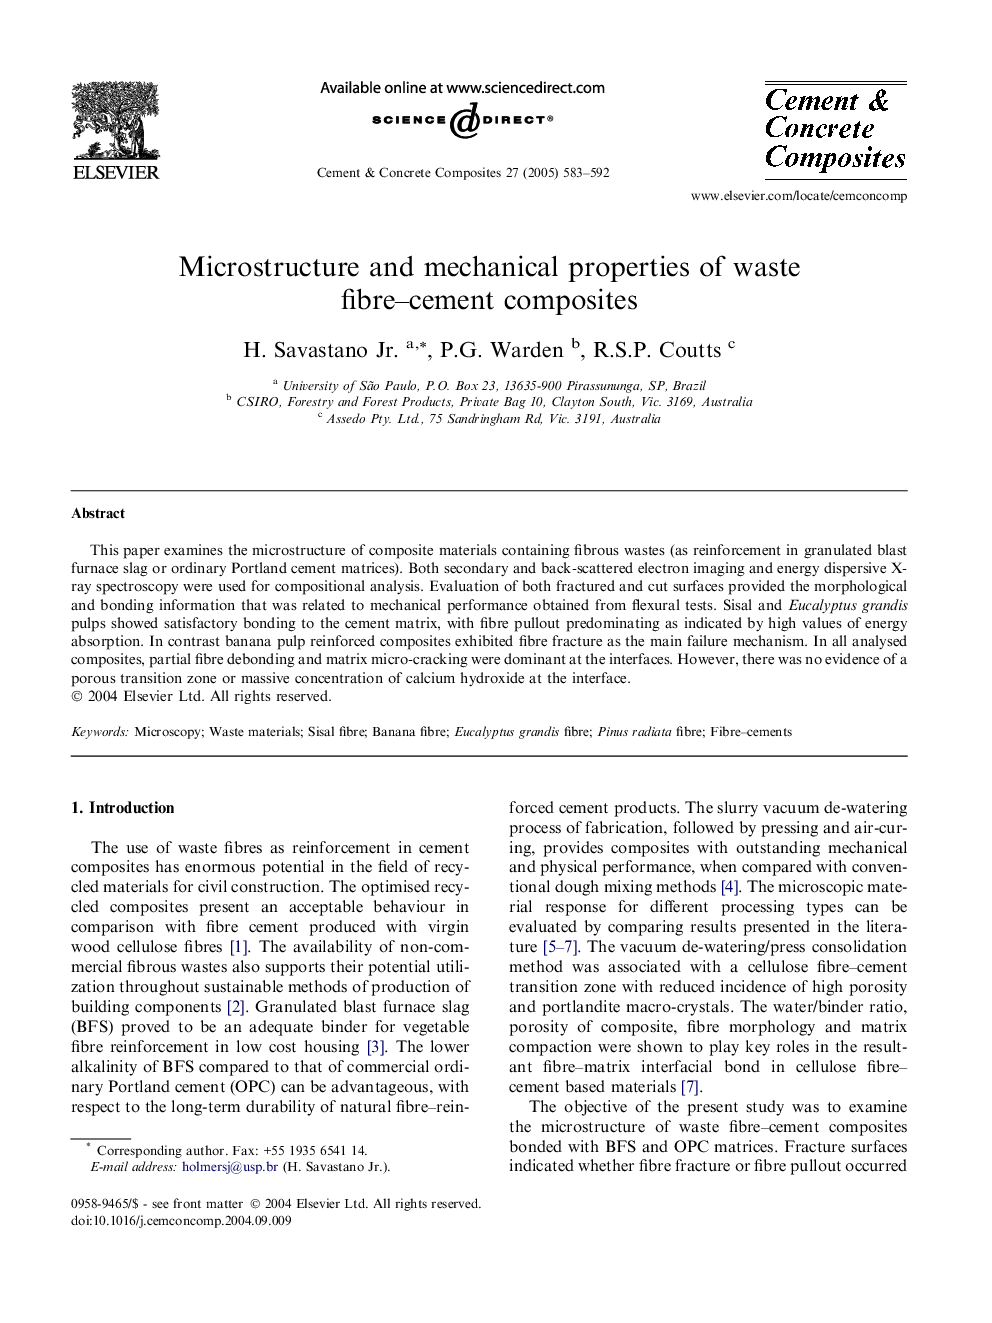 Microstructure and mechanical properties of waste fibre-cement composites